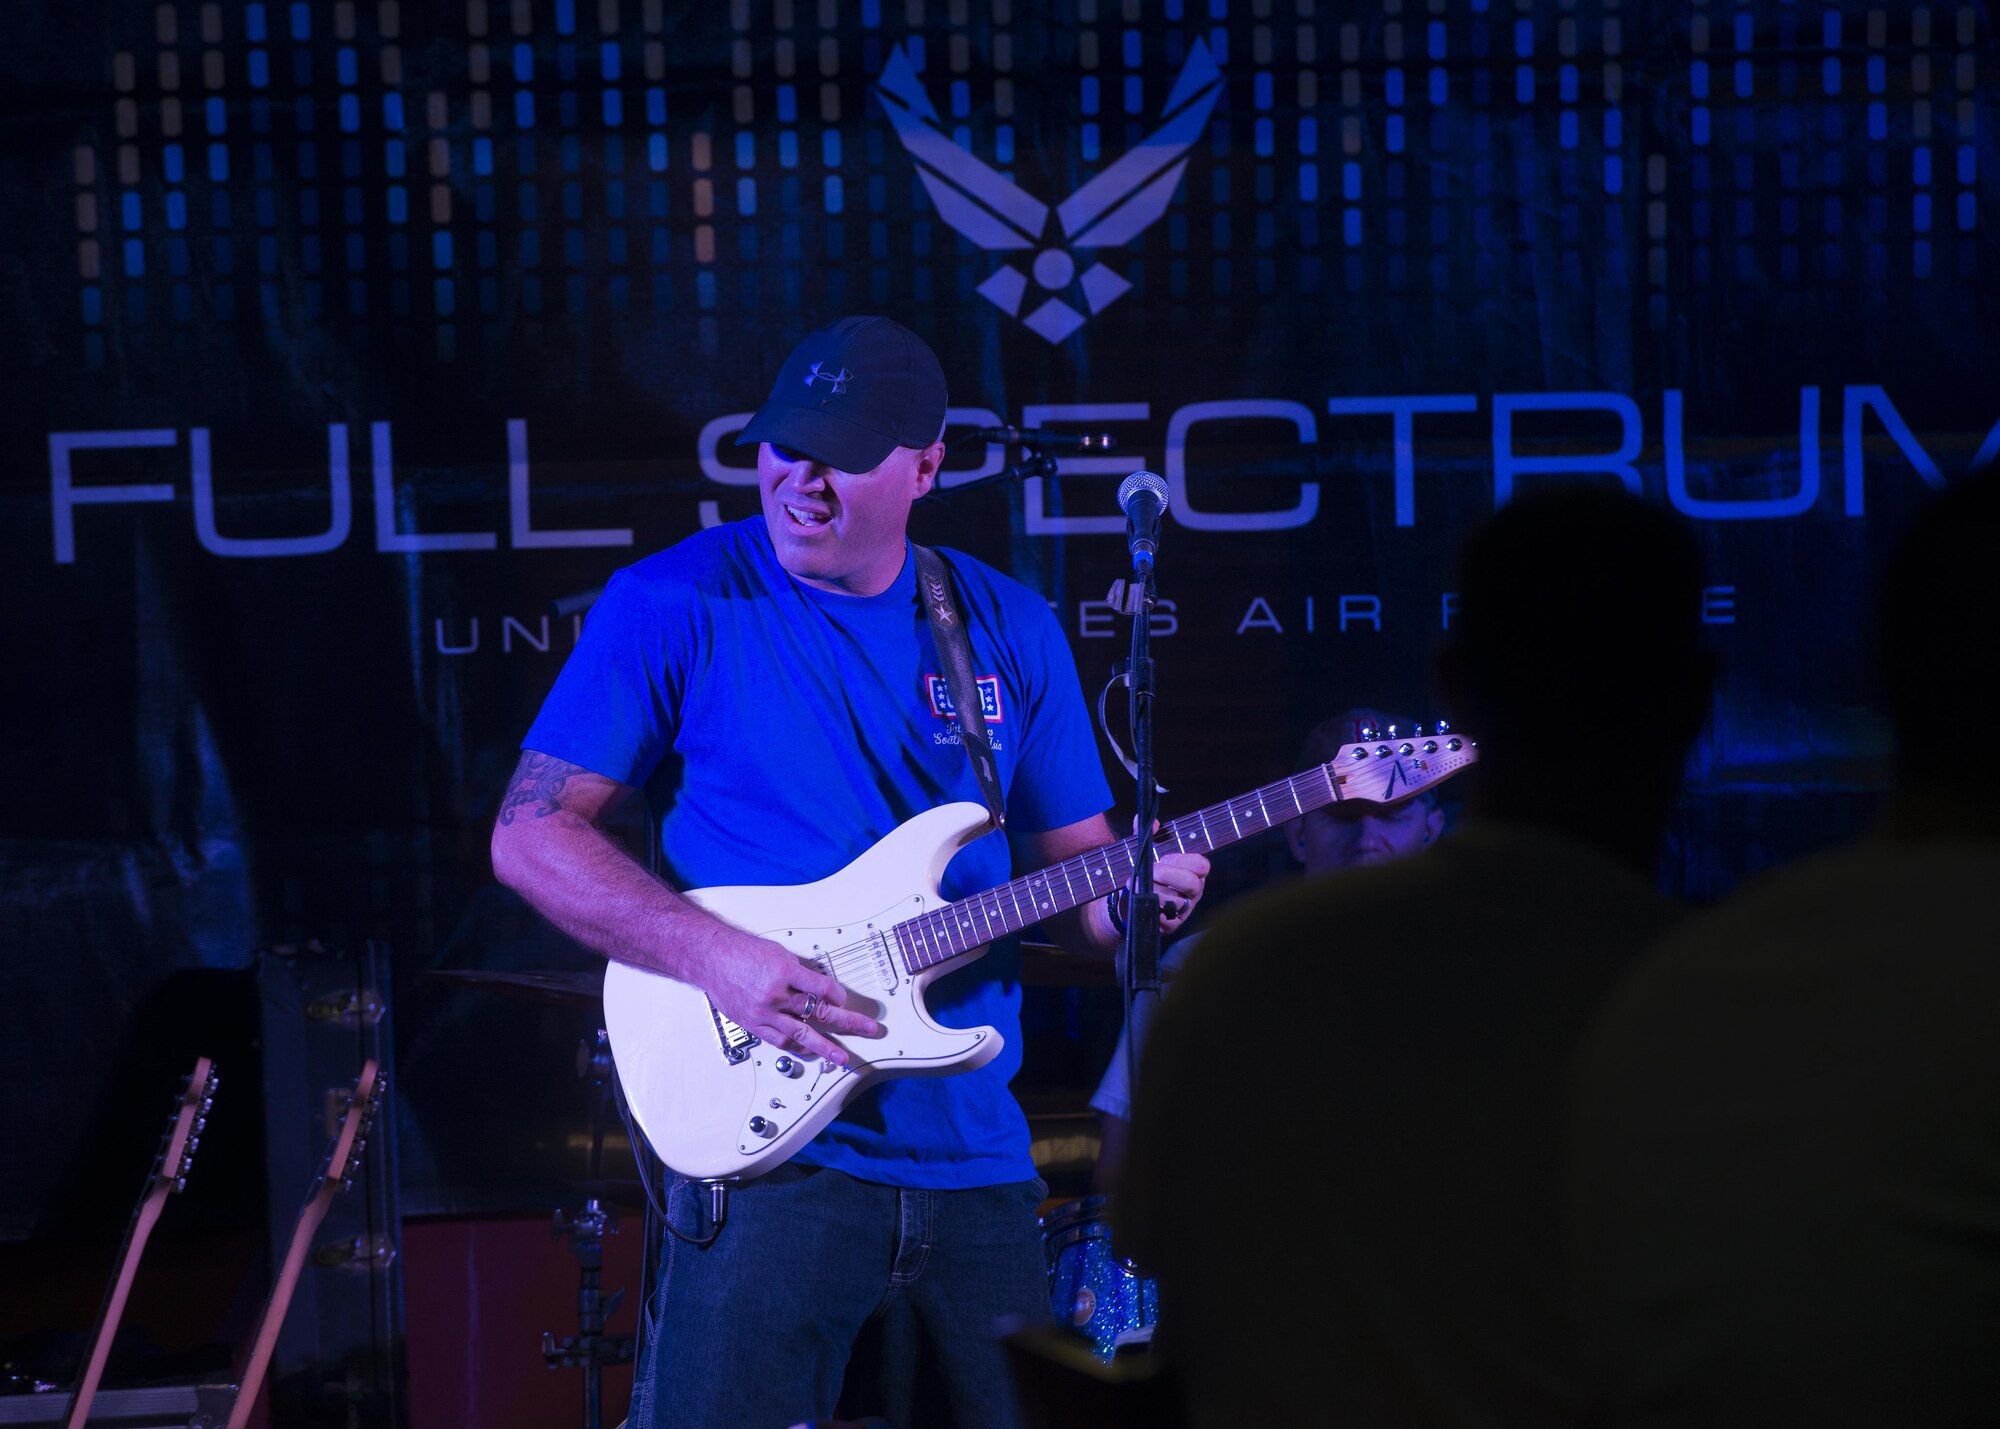 Tech. Sgt. Jason Cale, a guitarist with Air Force’s Central Command Band, Full Spectrum, performs at the Fox Sports Lounge at Al Udeid Air Base, Qatar Oct. 13, 2015. The show which featured hit songs  “Uptown Funk,” “Beat It,” and “Superstitious” was the last for the band before the  group kicks off a 16-day tour.  (U.S. Air Force Photo/Tech. Sgt. James Hodgman)